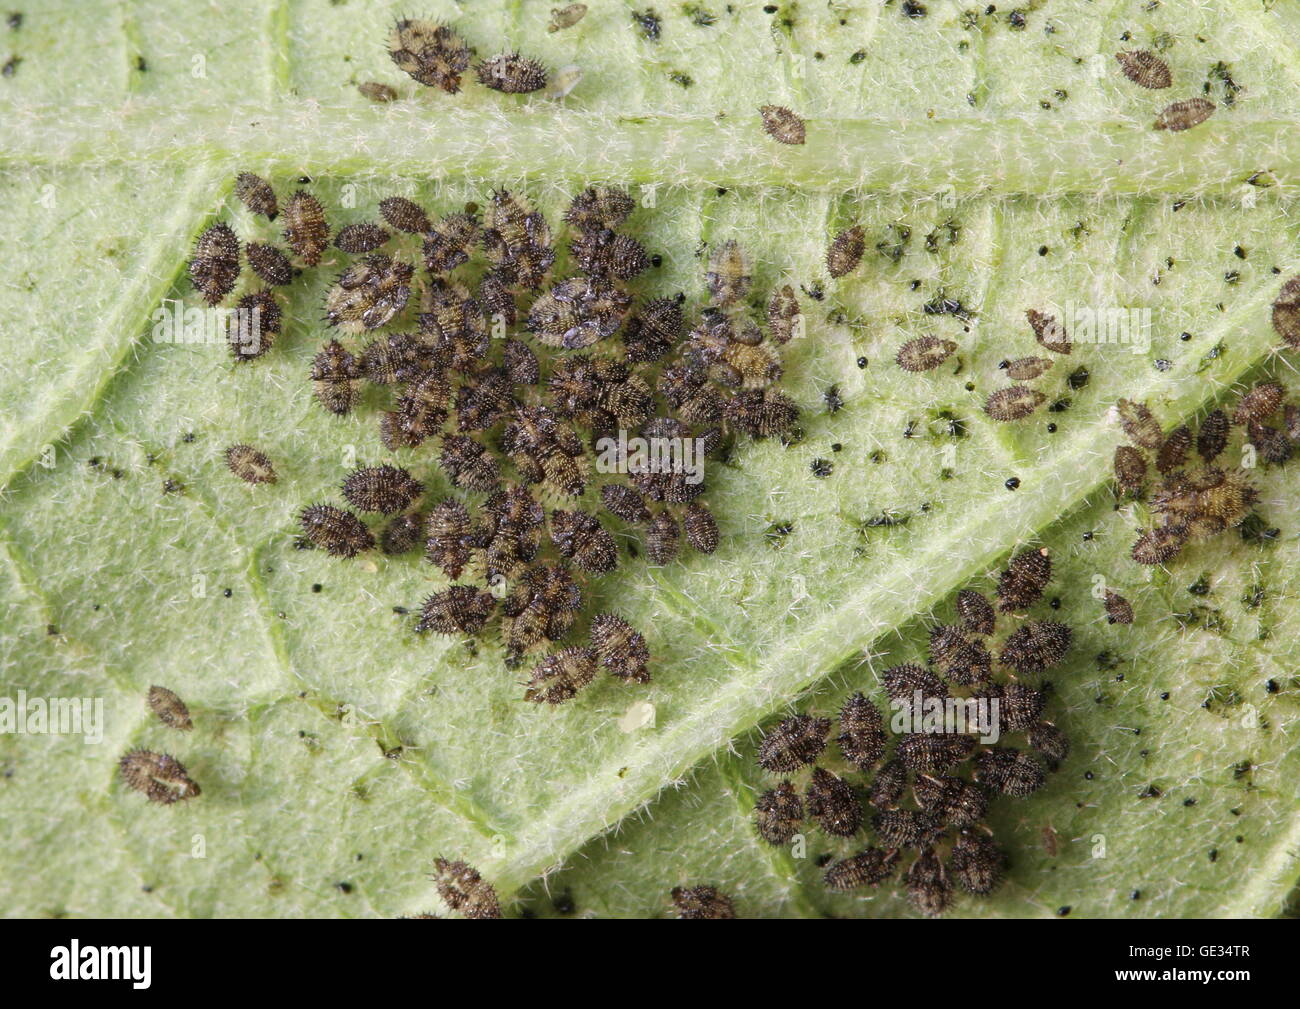 Colony of garden pests on an eggplant leaf. Stock Photo